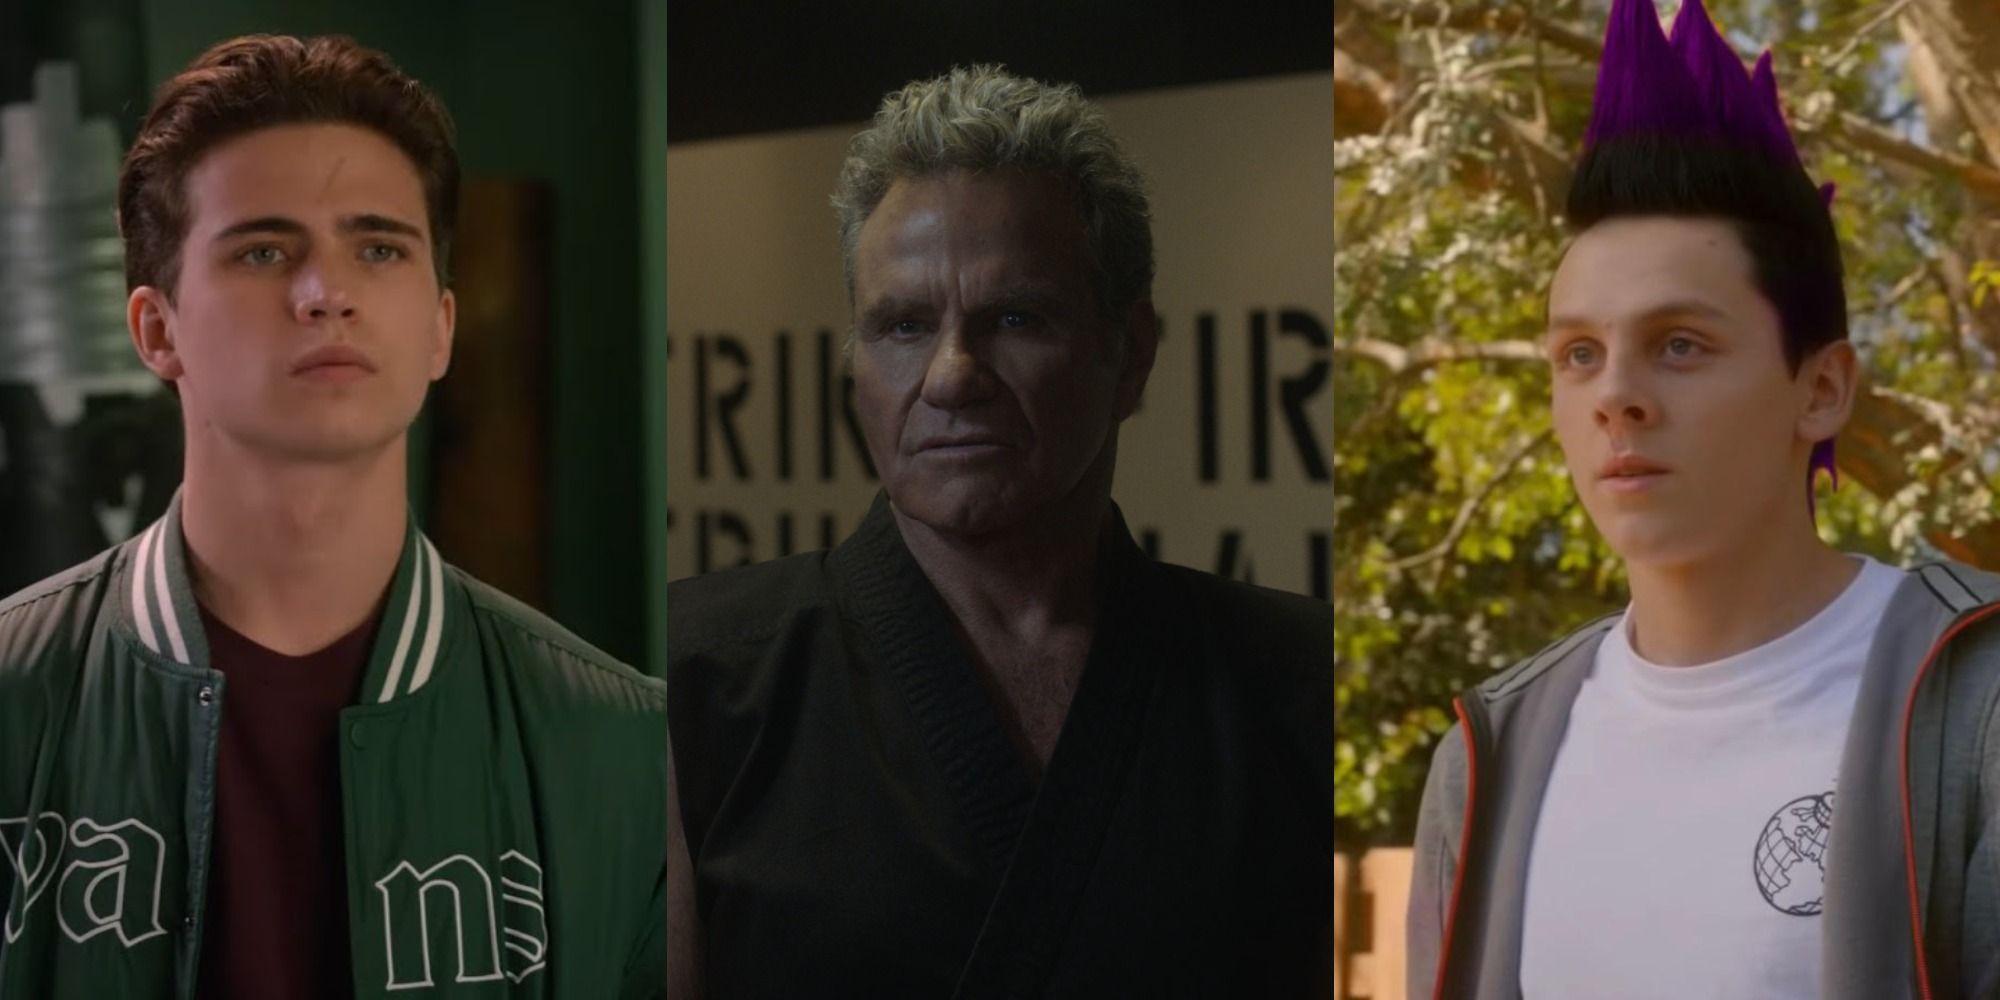 A collage of Robby, Kreese, and Hawk from Cobra Kai.